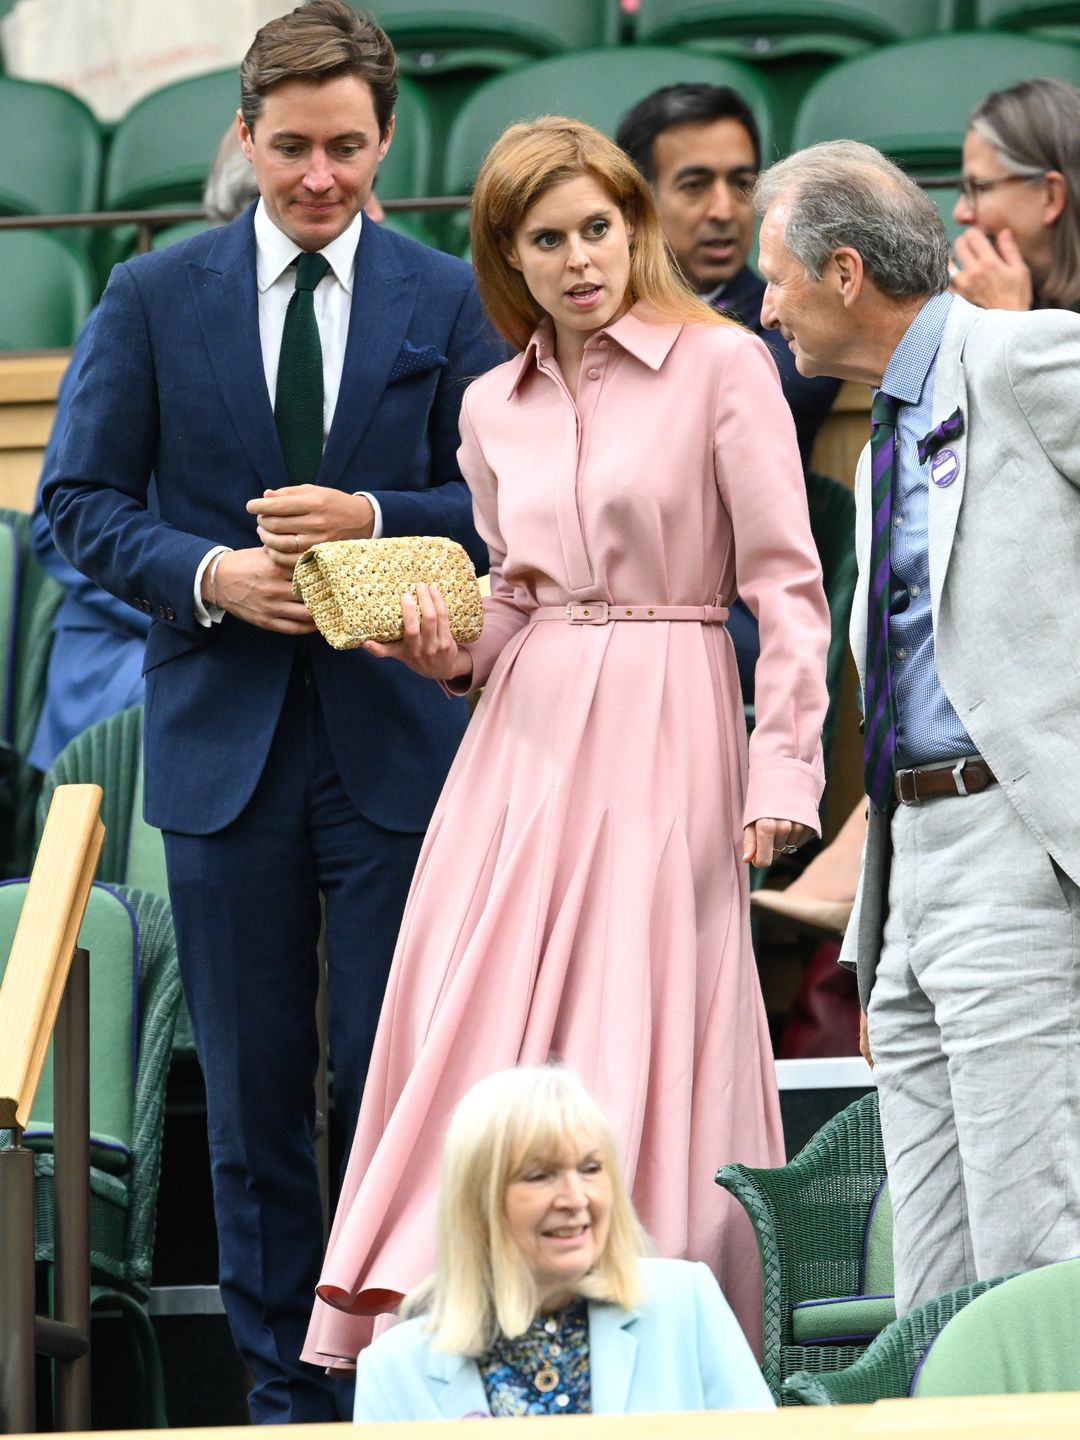 Princess Beatrice wore the Emilia Wickstead ‘Marione’ dress in pink and Roger Vivier's 'Broche Vivier Buckle Crochet Clutch' in raffia 